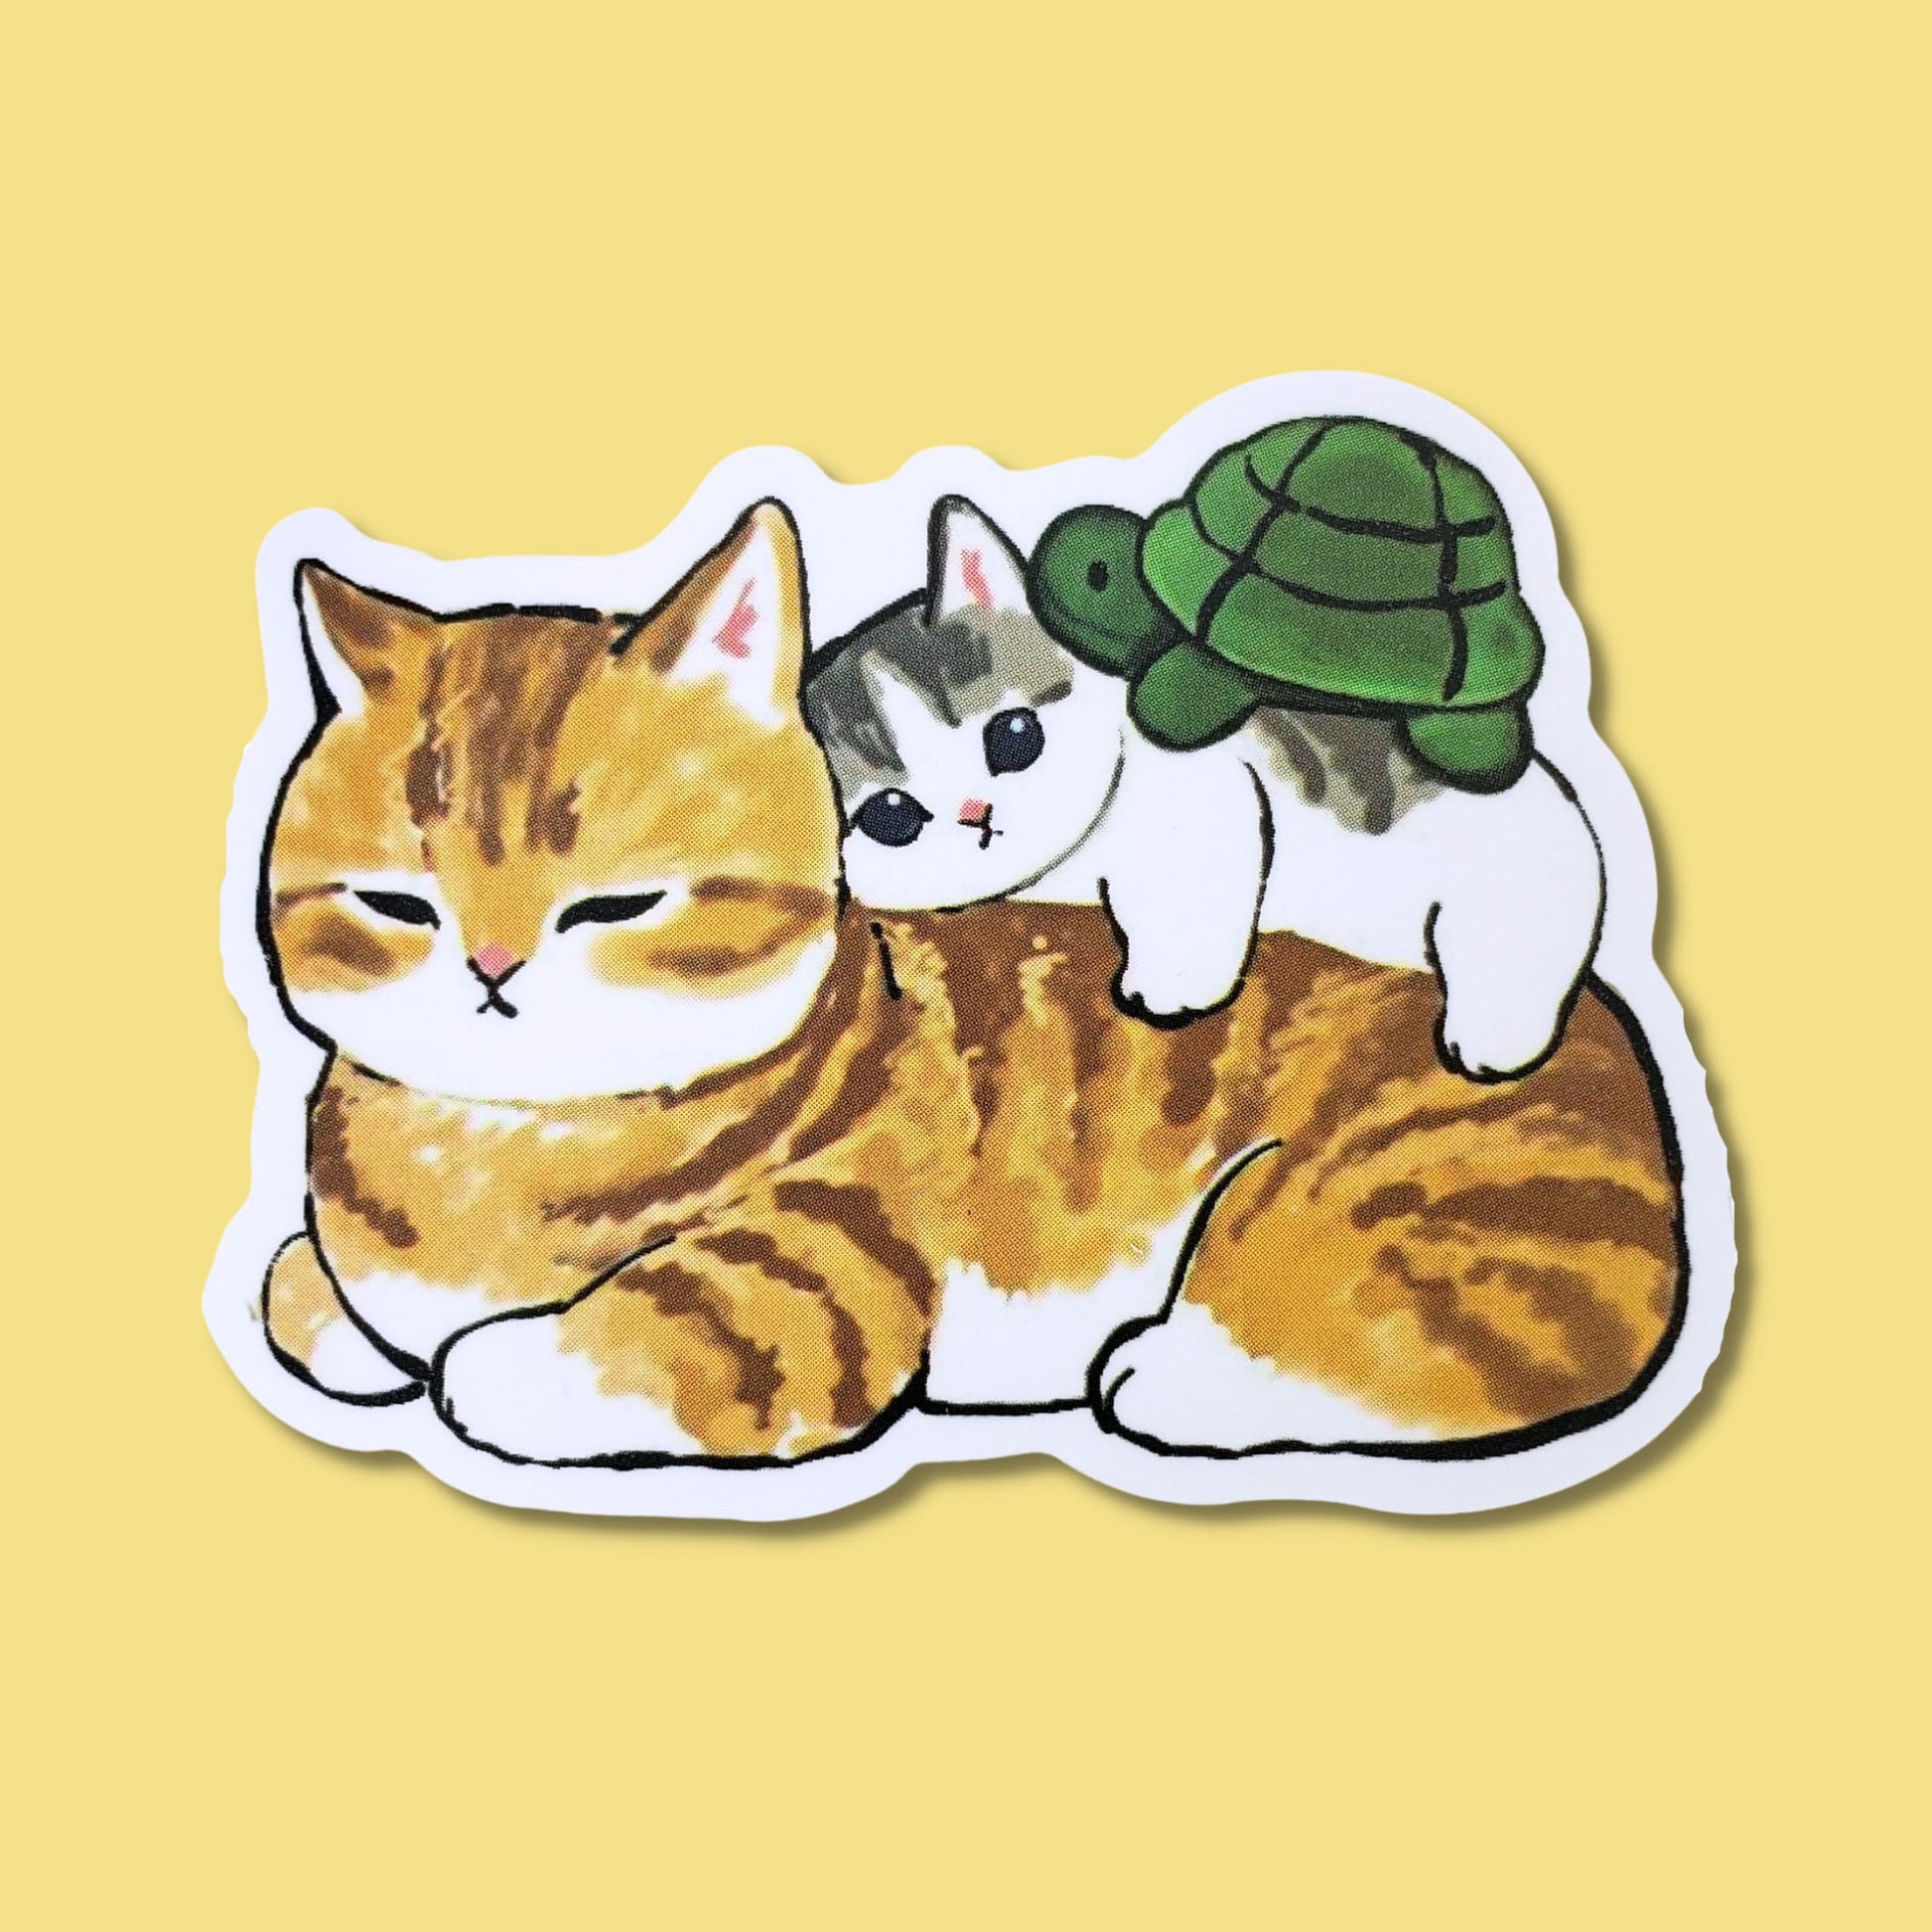 Orange Tabby, Gray Tabby Kitten, and Turtle Waterproof Sticker | Cat Stack from Confetti Kitty, Only 1.00